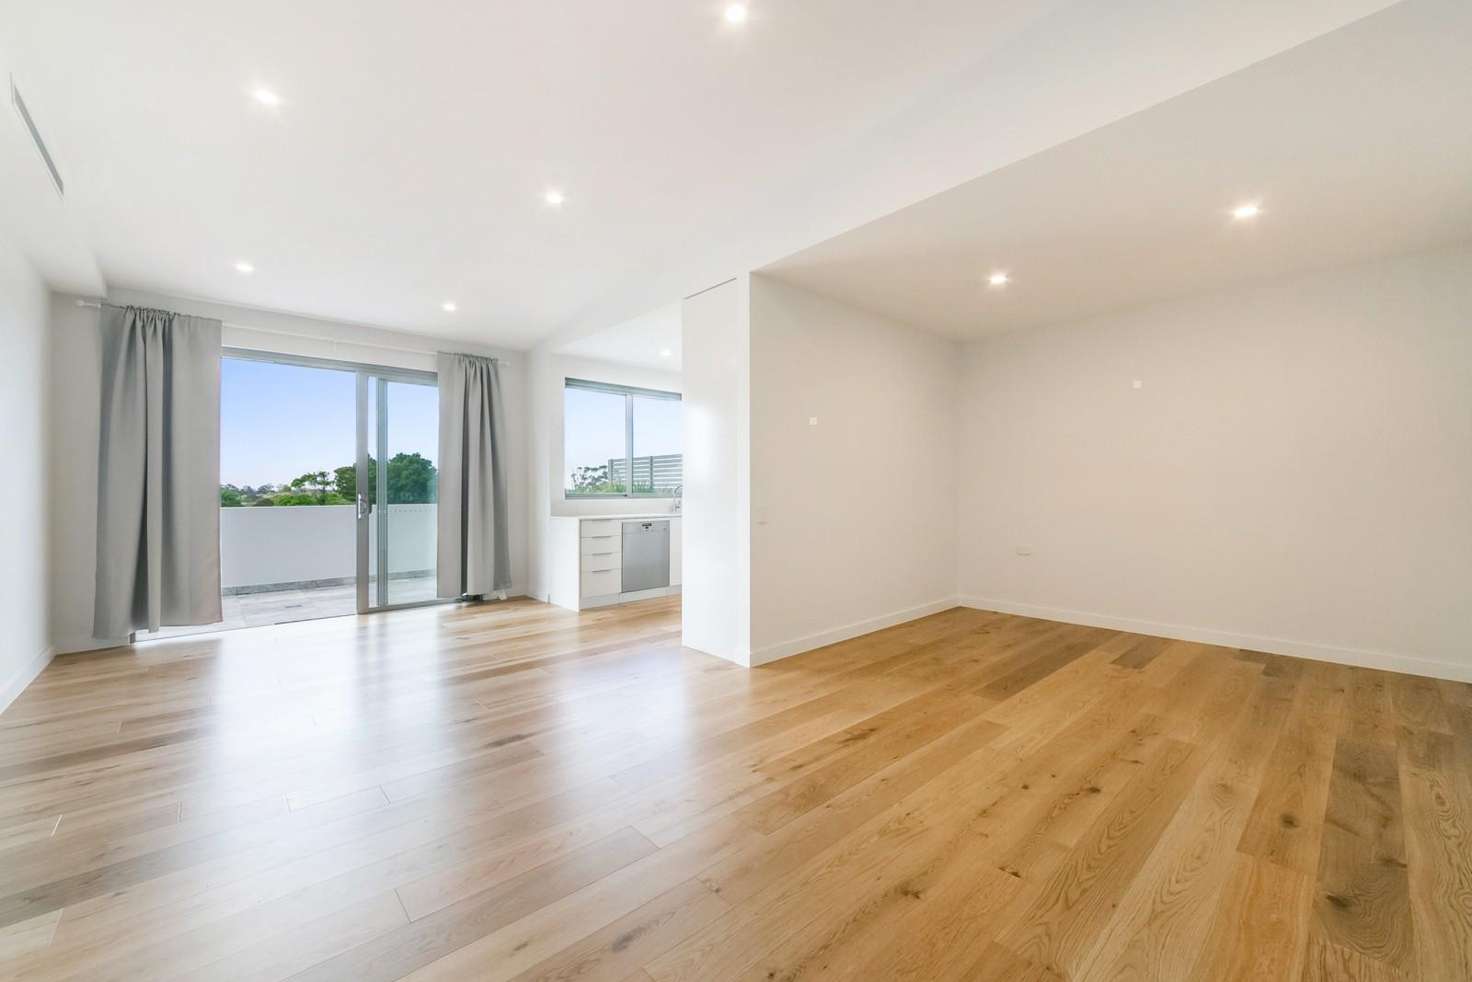 Main view of Homely apartment listing, 2403/177 Mona Vale Road, St Ives NSW 2075